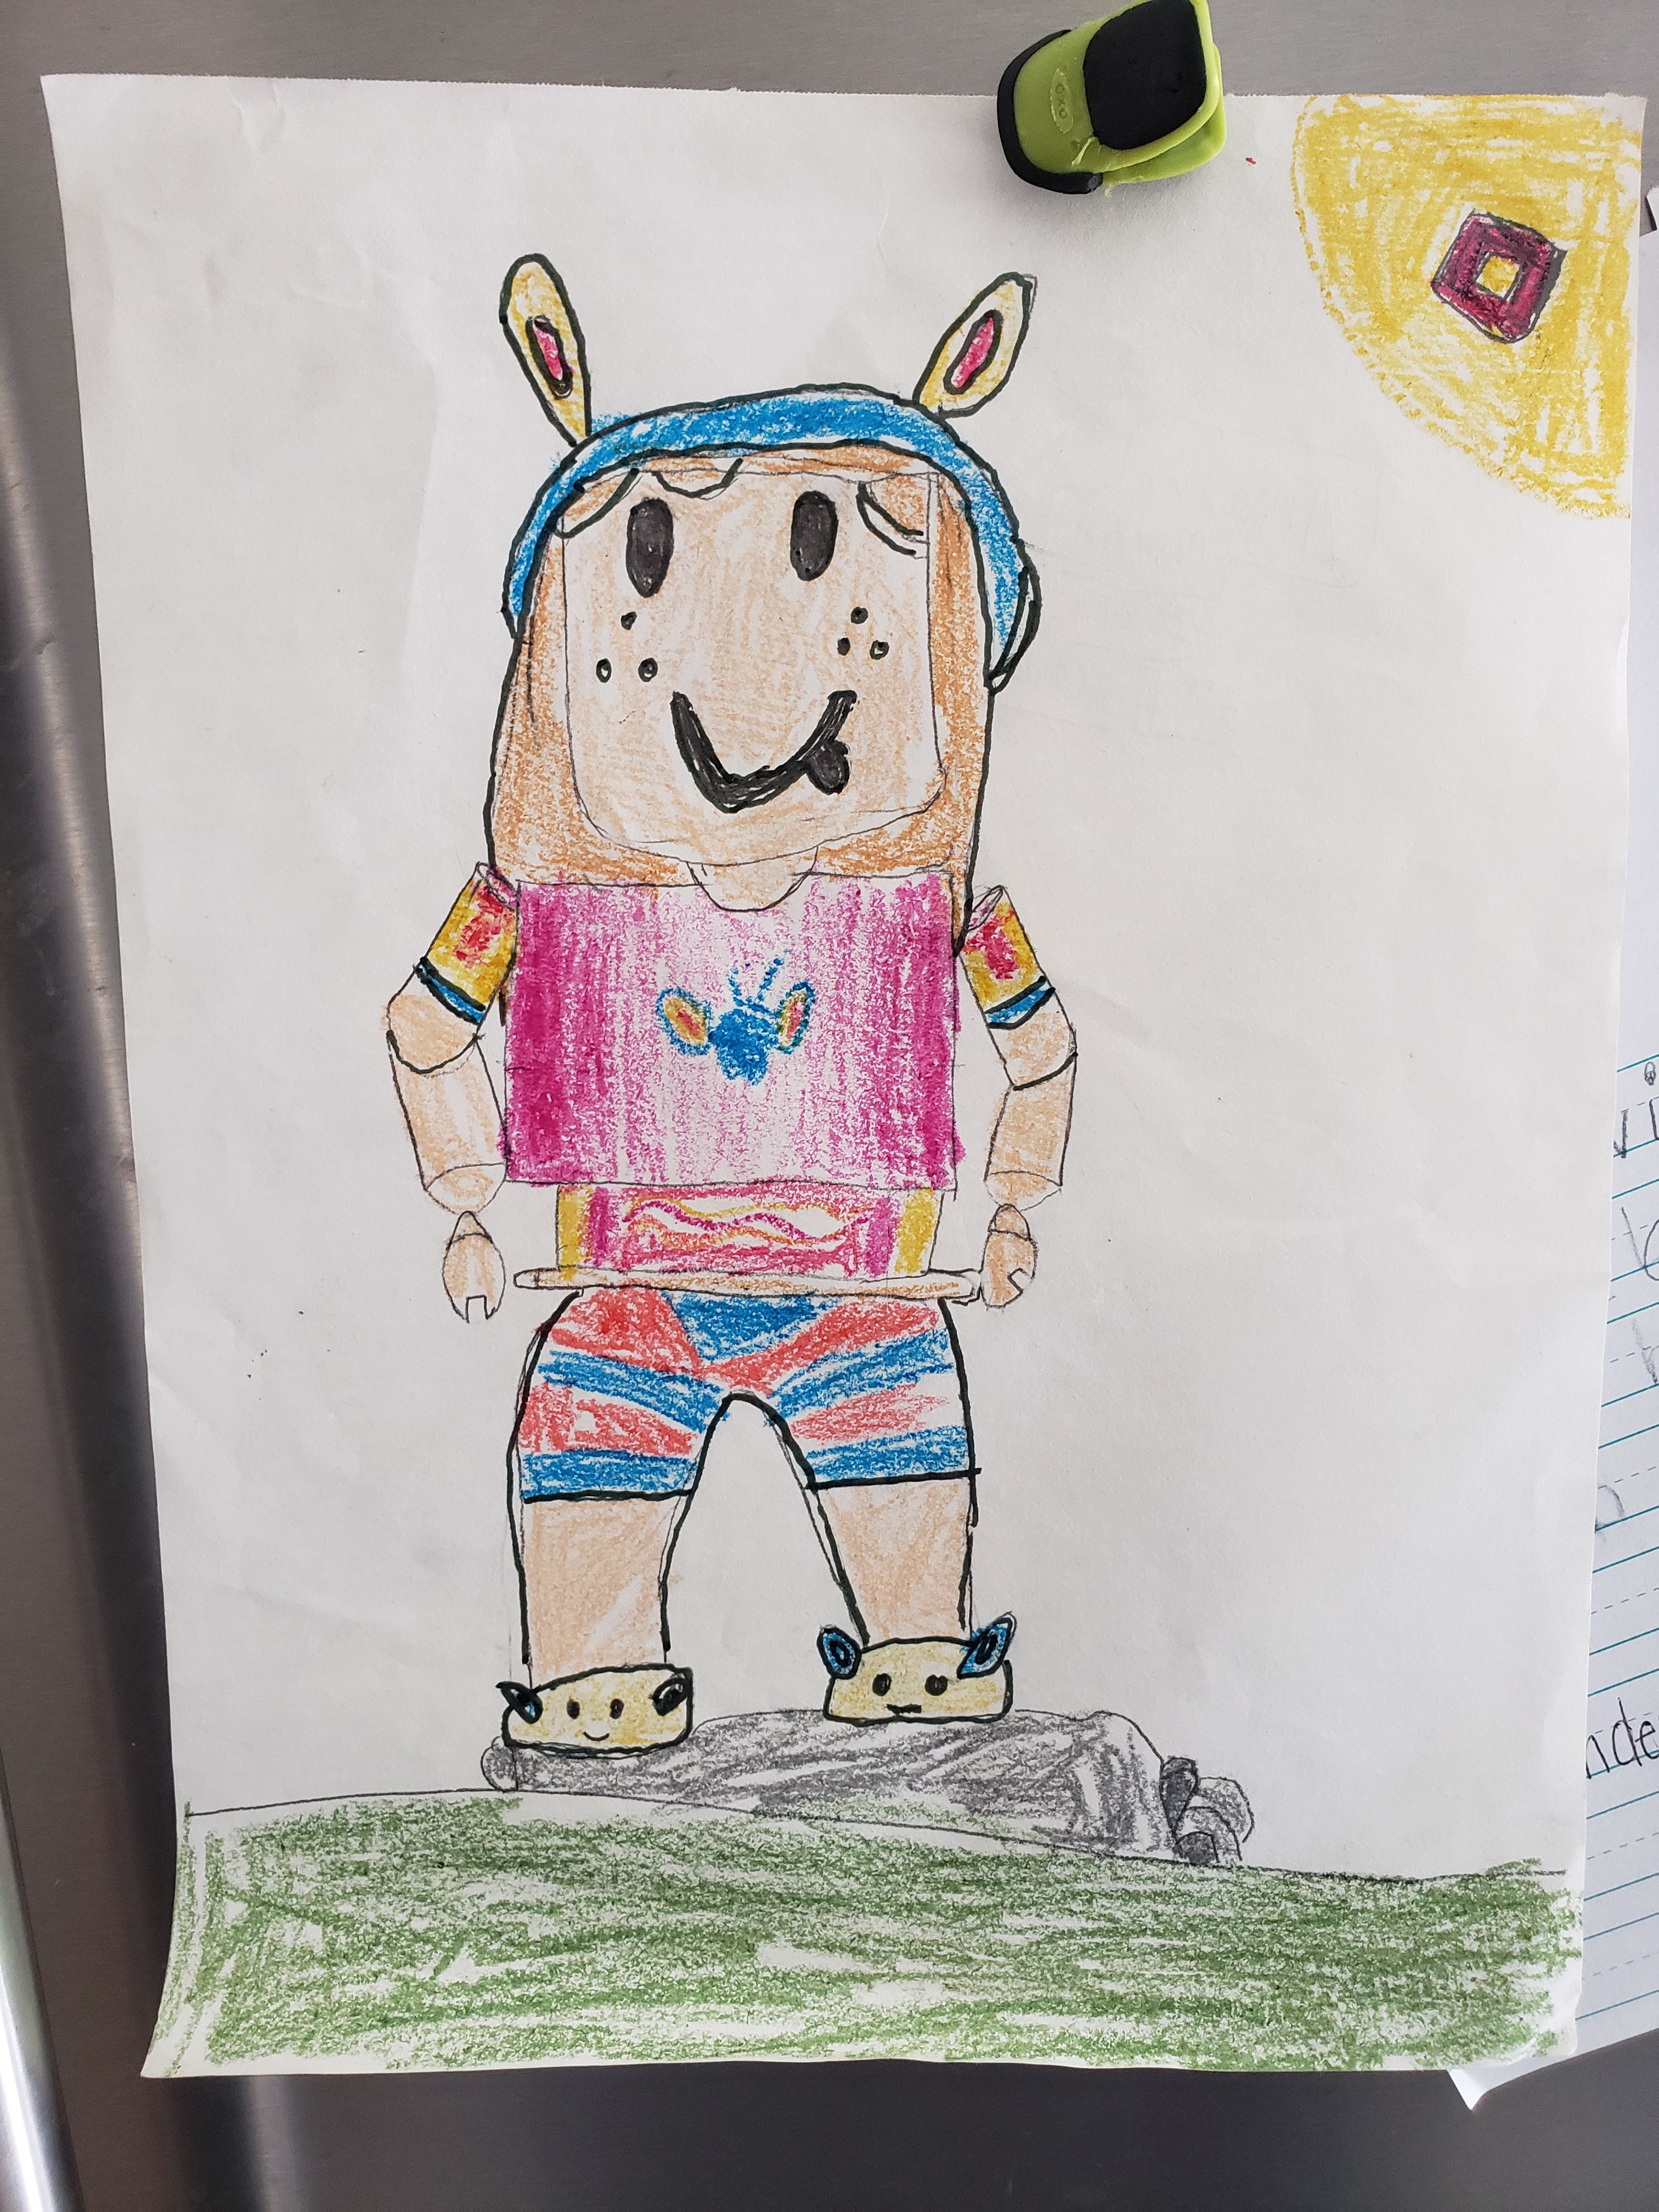 Learn How To Draw Your Own Roblox Character Small Online Class For Ages 6 11 Outschool - draw your own roblox character